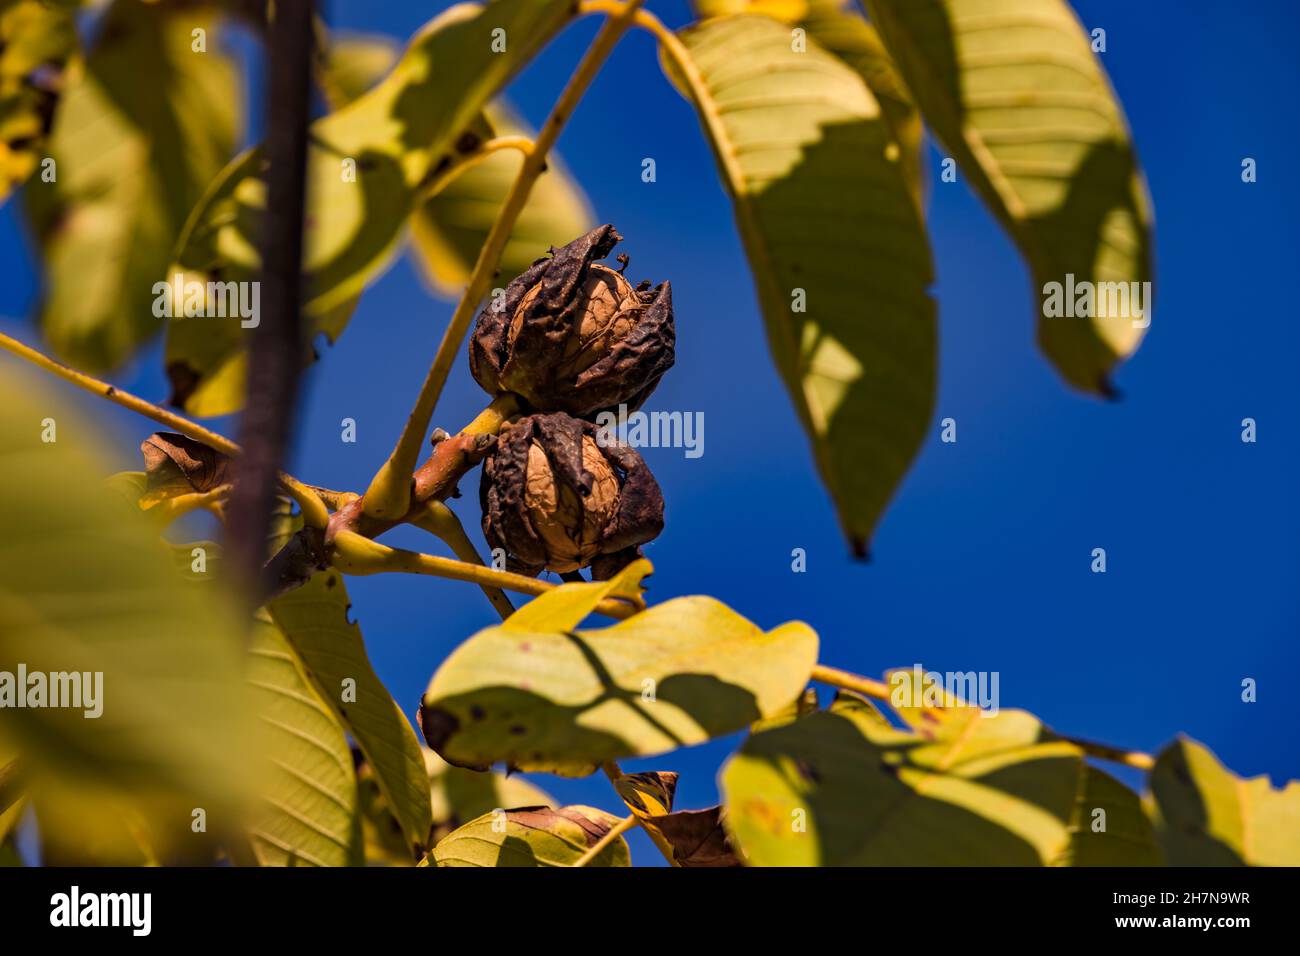 Walnuts and leaves on the tree with open shell against blue sky in autumn Stock Photo